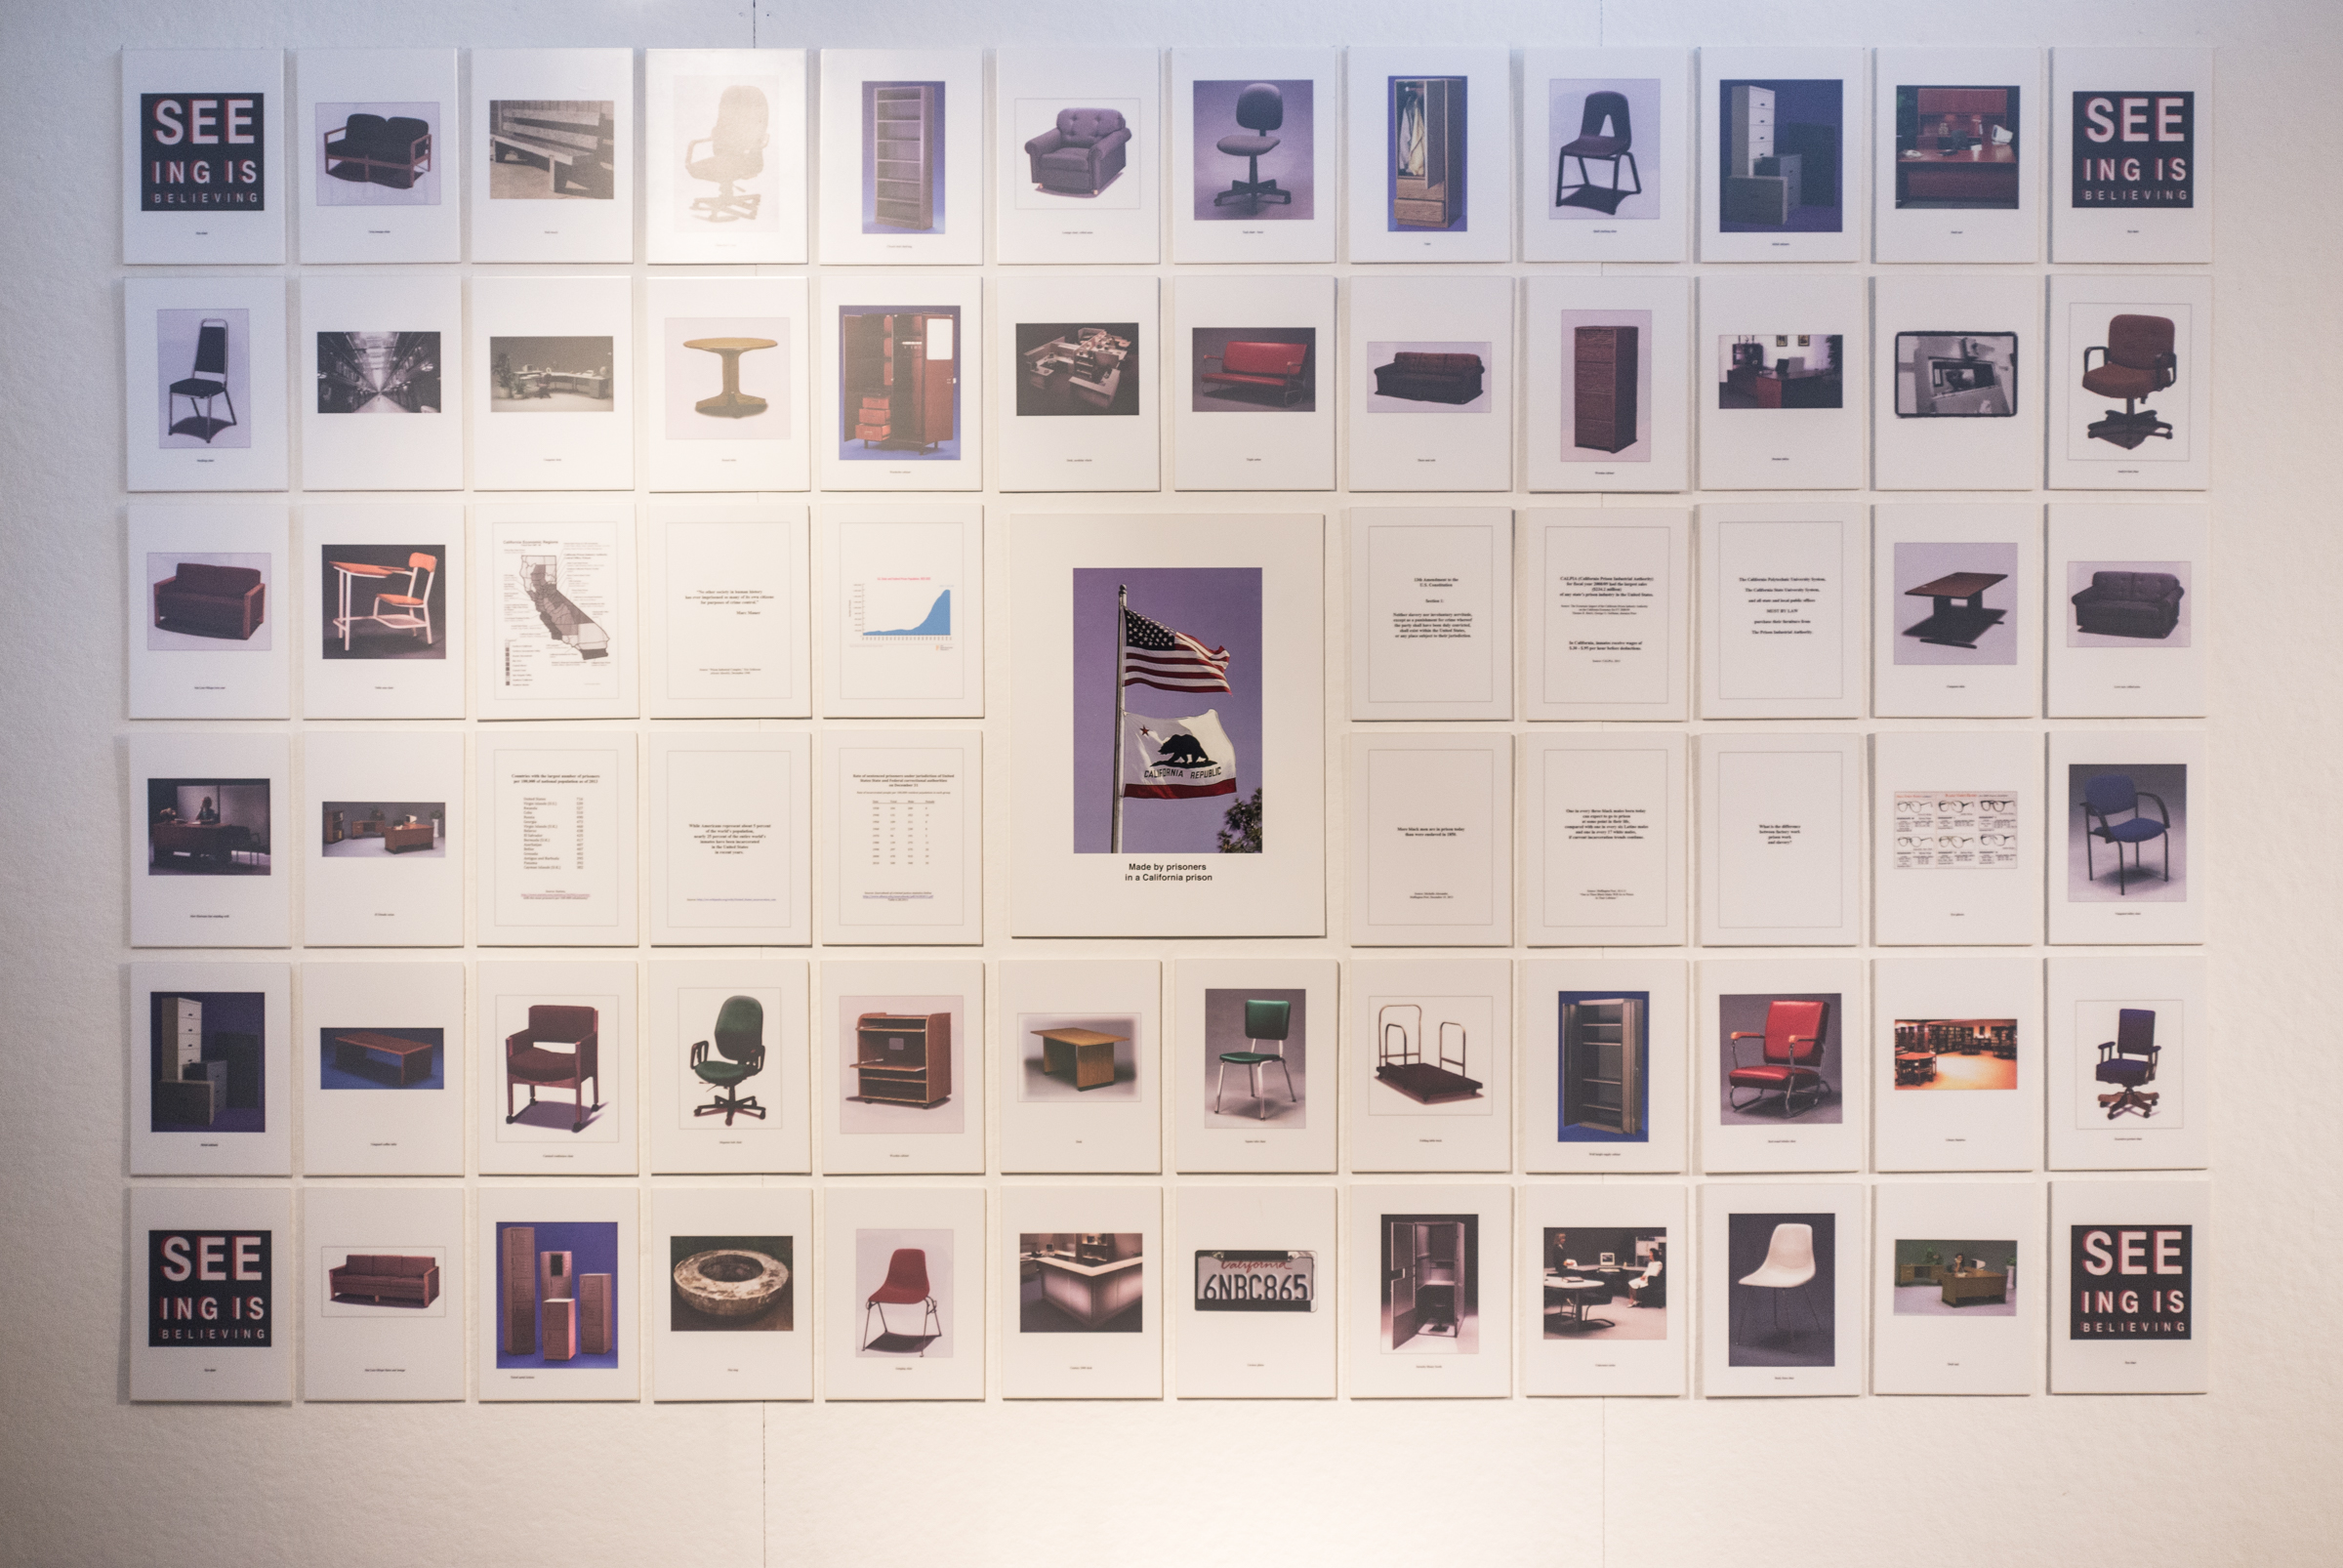 Copy of made-in-america-exhibition-install-20.jpg